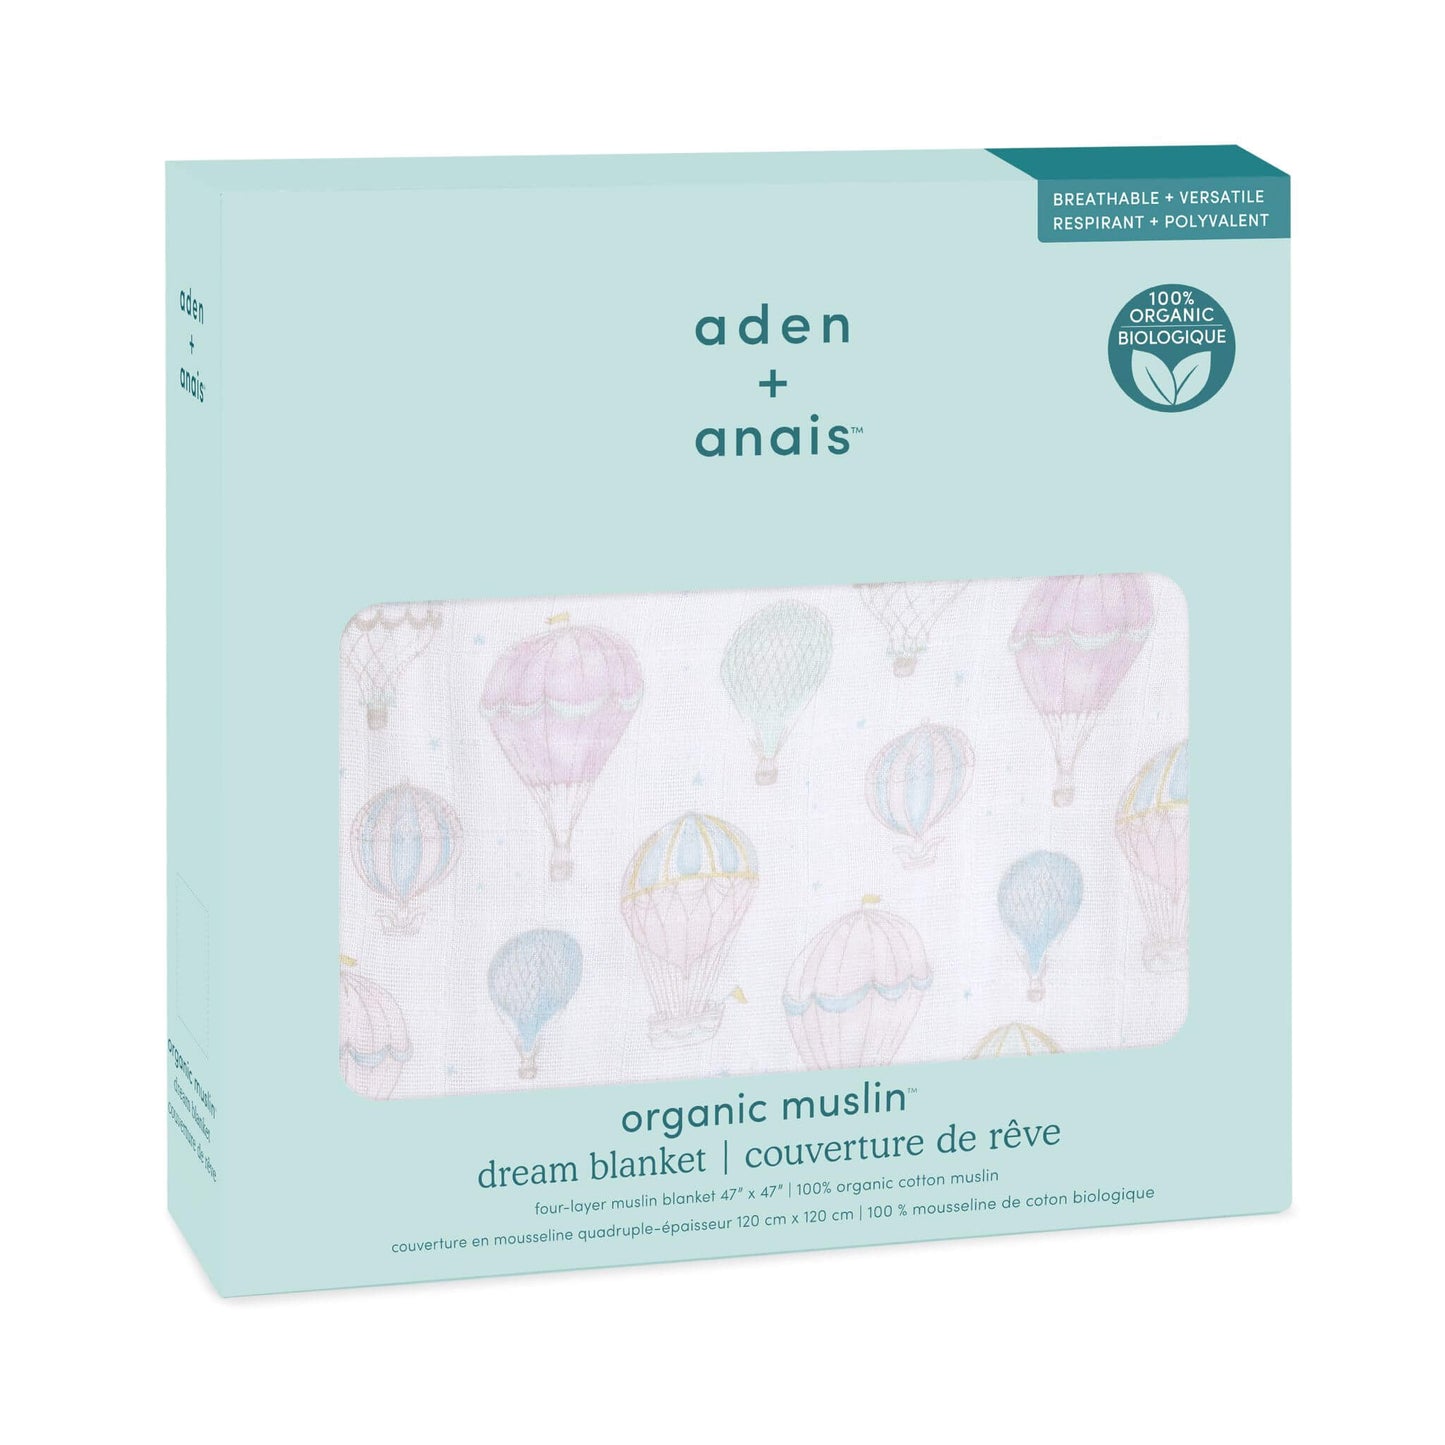 aden + anais Organic Dream Blanket (Above the Clouds)